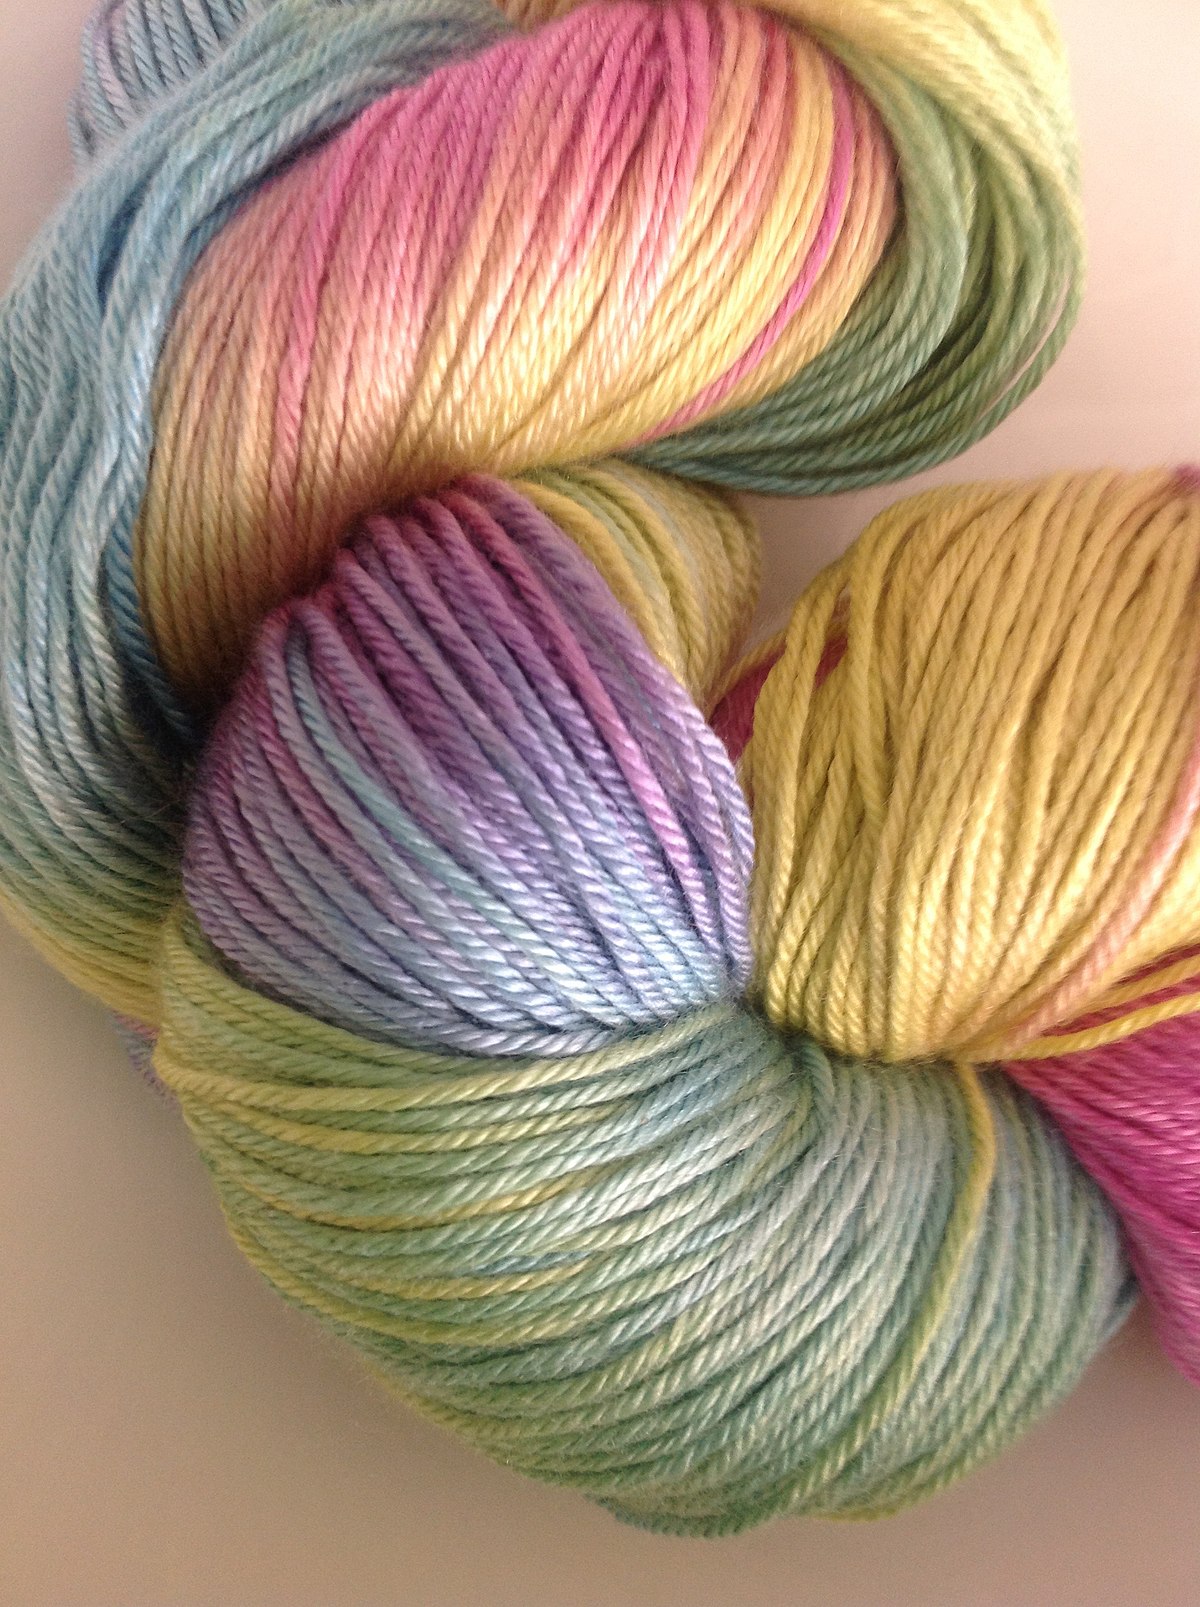 File:Cashmere and silk fingering weight yarn, hand dyed.jpg - Wikimedia  Commons